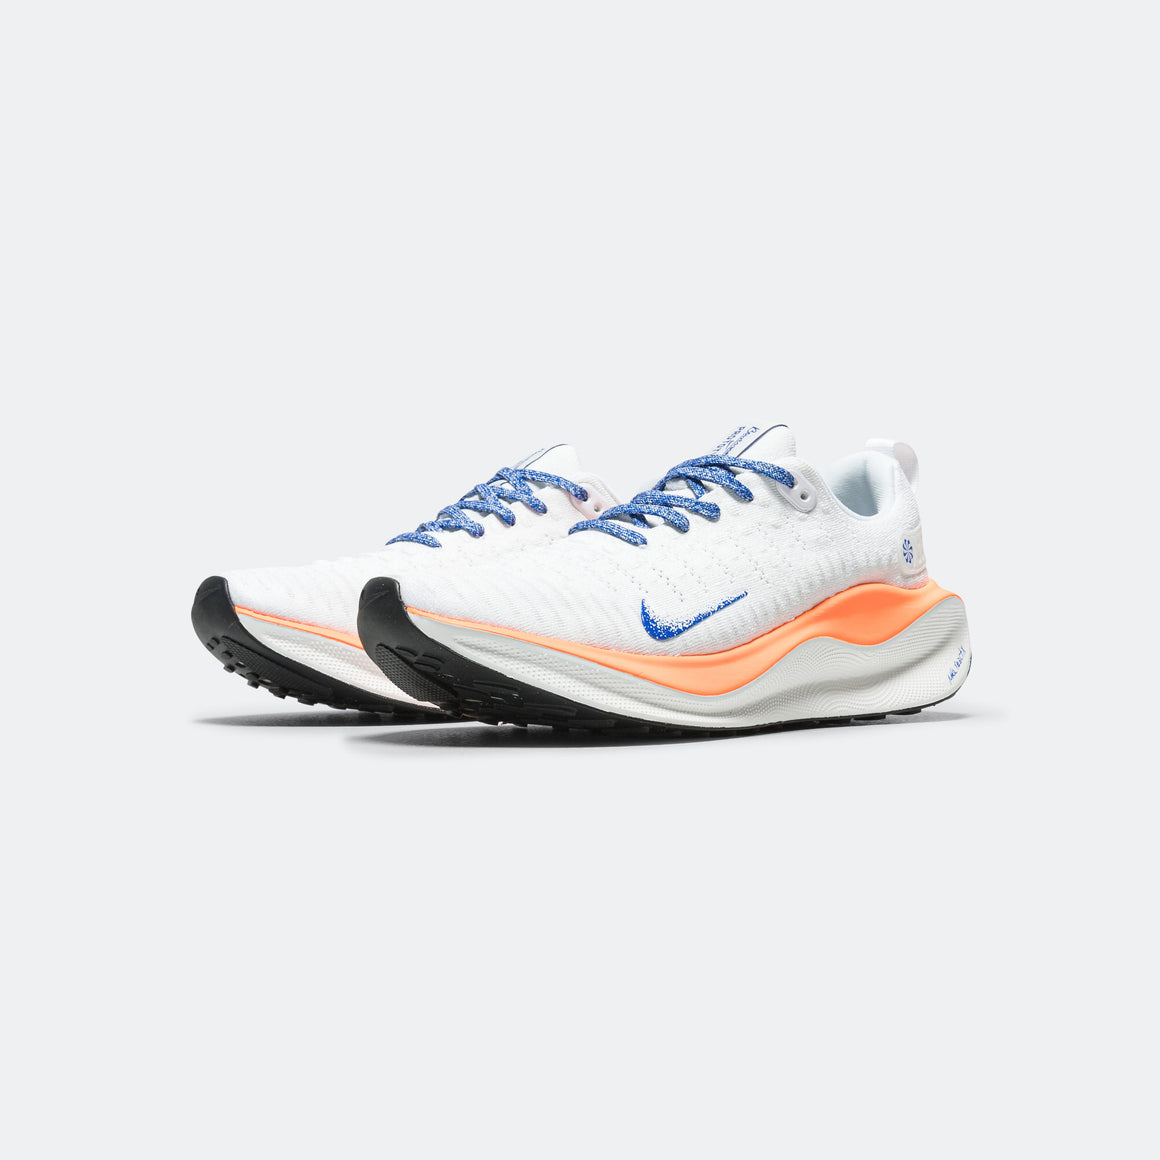 Nike - Mens InfinityRN 4 FP 'Blueprint' - White/Racer Blue-Total Orange - Up There Athletics